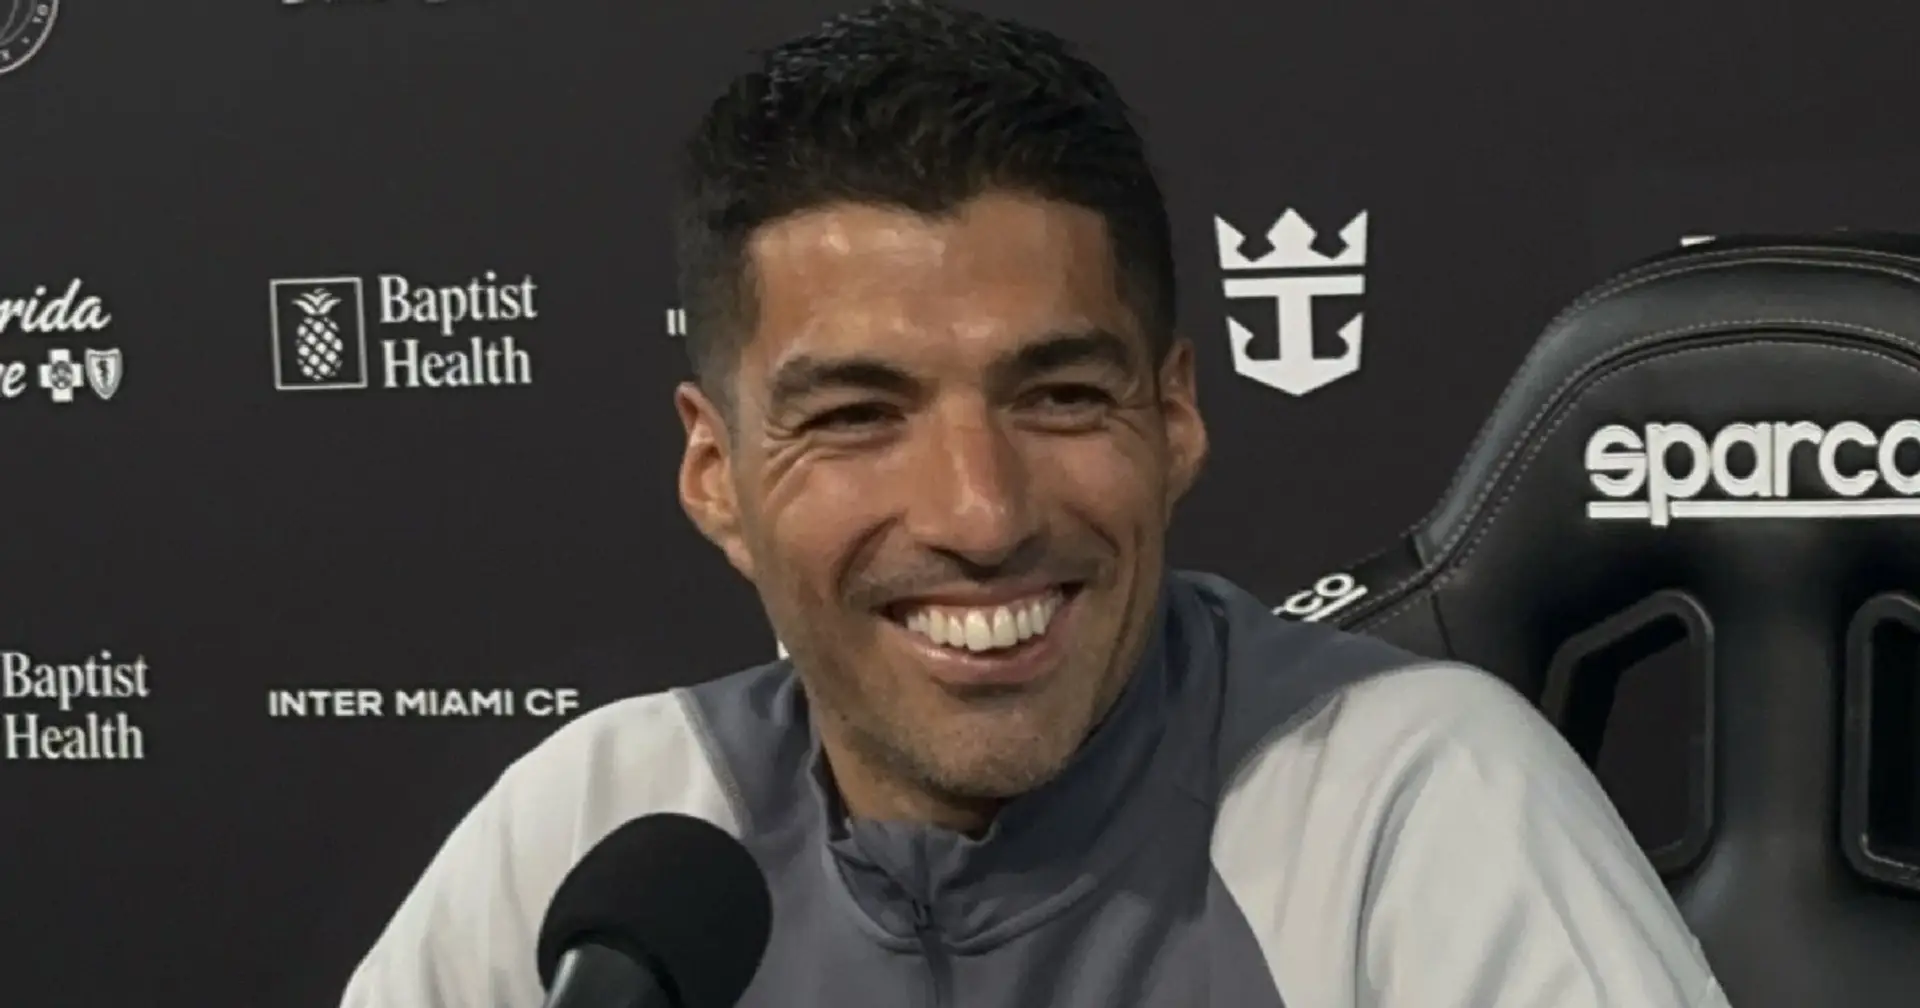 Suarez reveals he nearly joined Real Madrid instead of Barca – explains why deal fell through